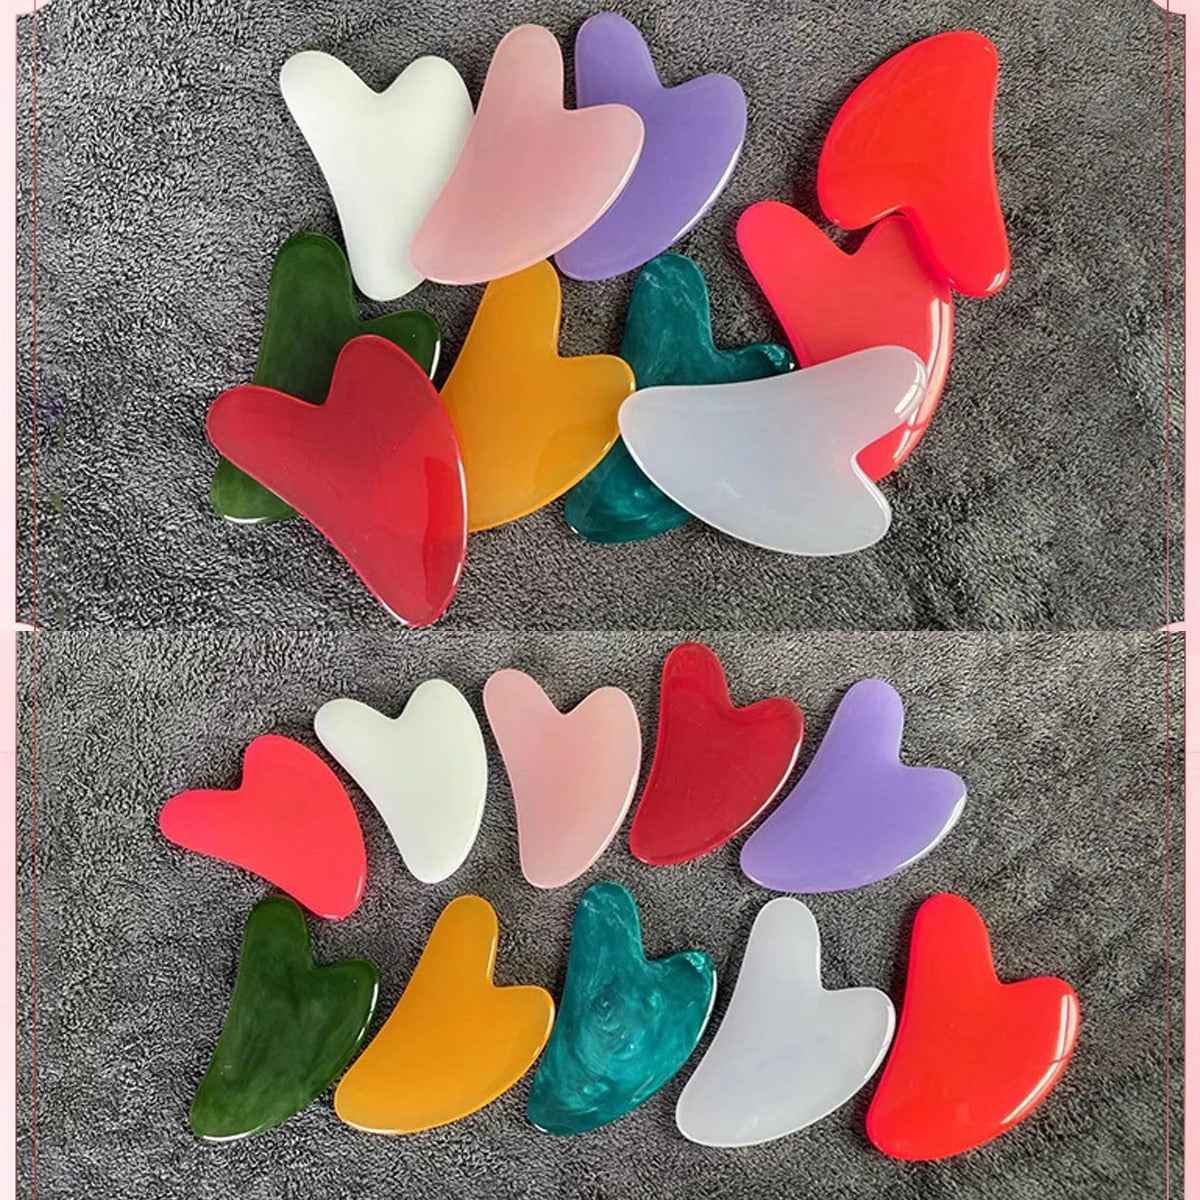 Heart Resin Gua Sha Massage Board for Face, Neck, and Body Care